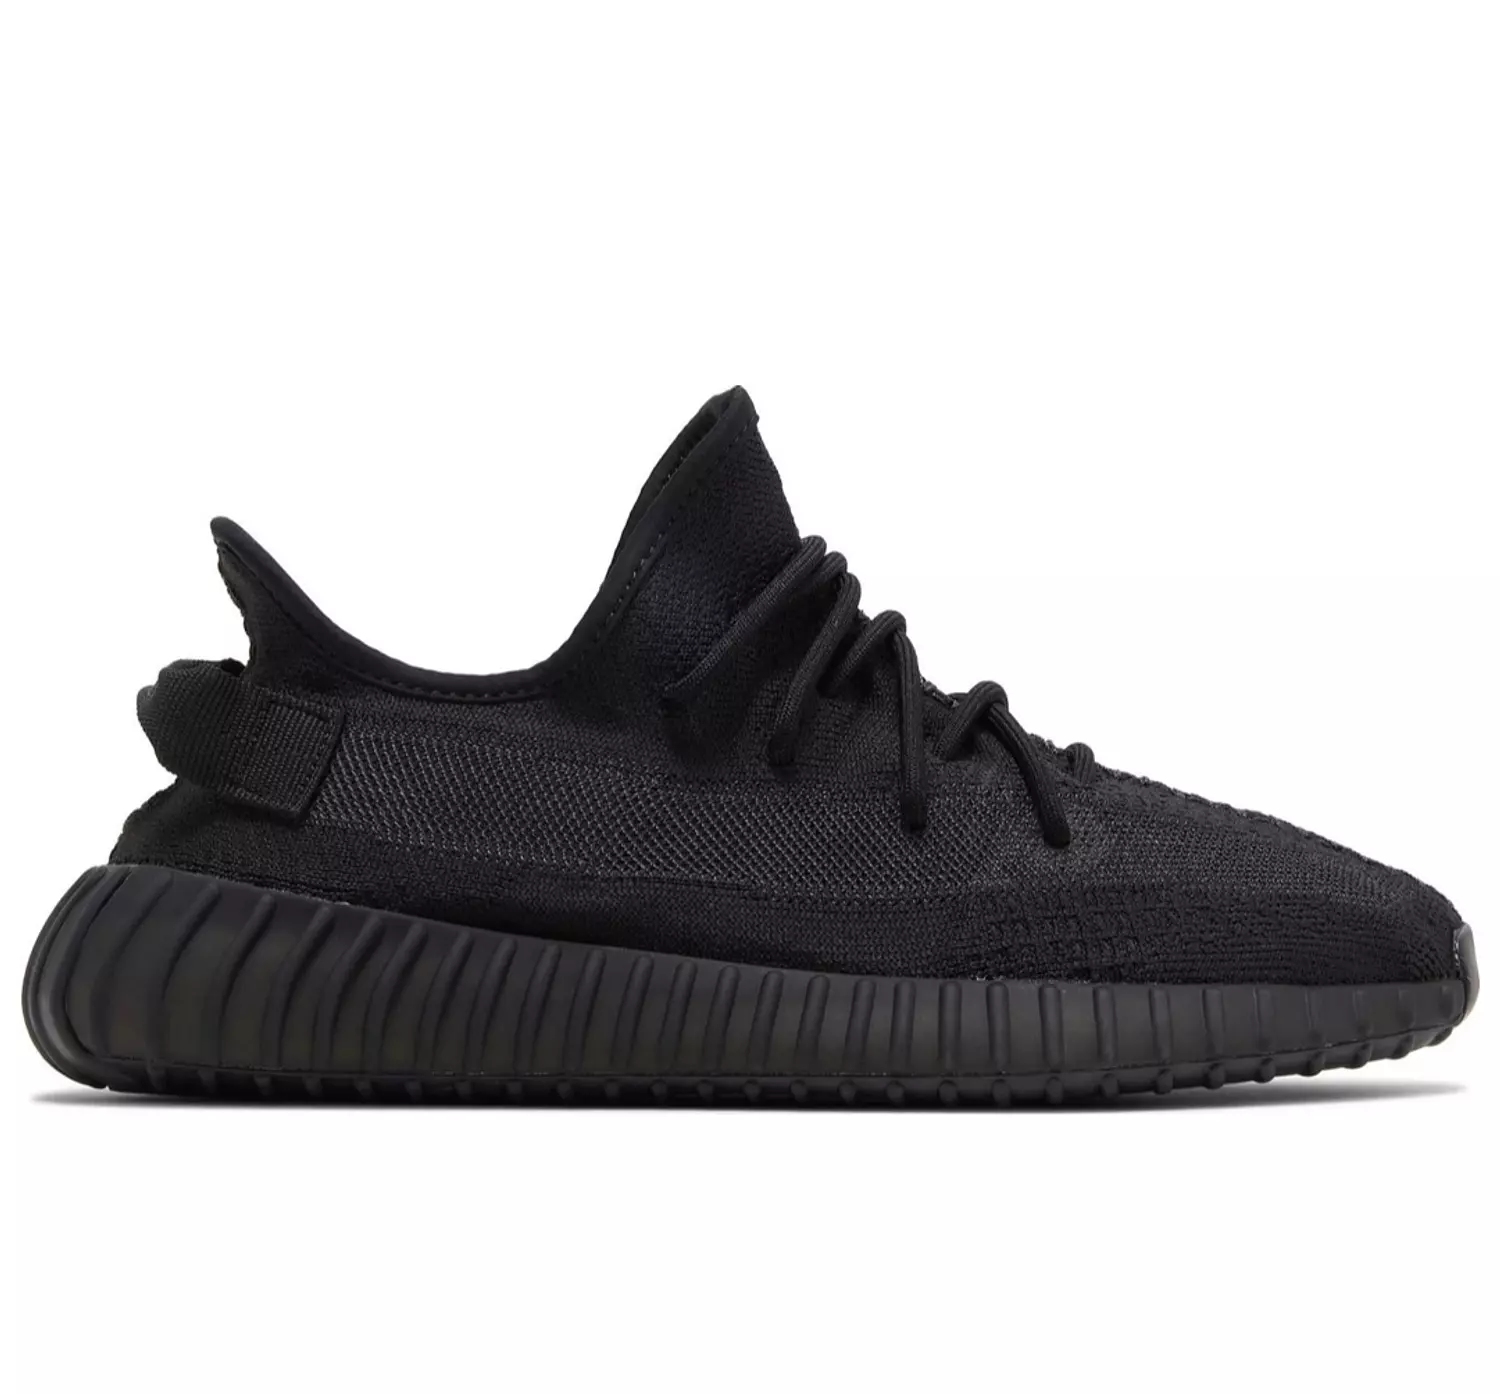 Yeezy Boost 350 V2 'Onyx' hover image